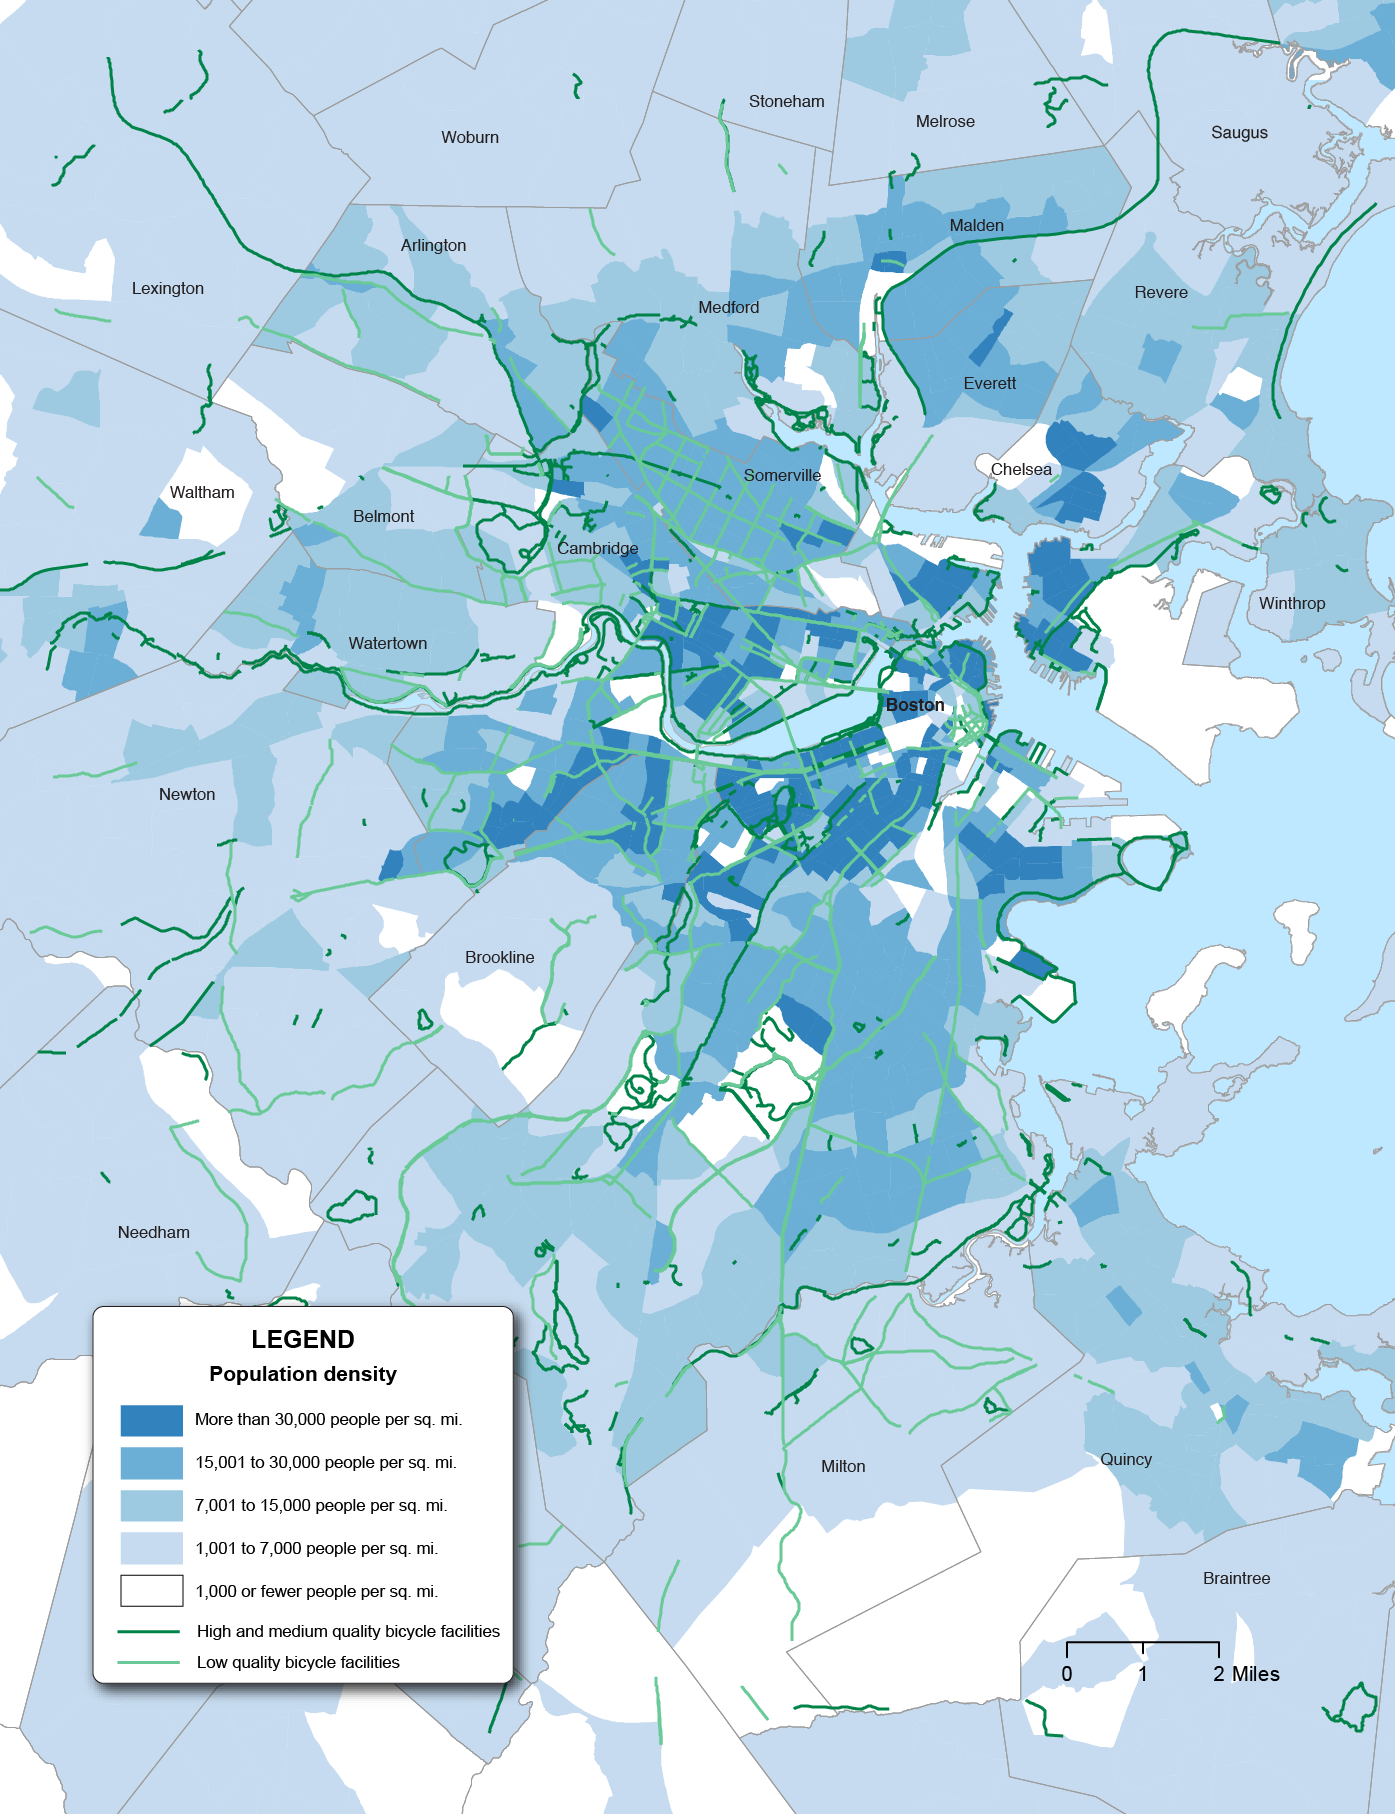 Figure 6-26 is a map of the Boston Region by municipality showing High and medium quality bicycle facilities and low quality bicycle facilities overlaid with population density per square mile.